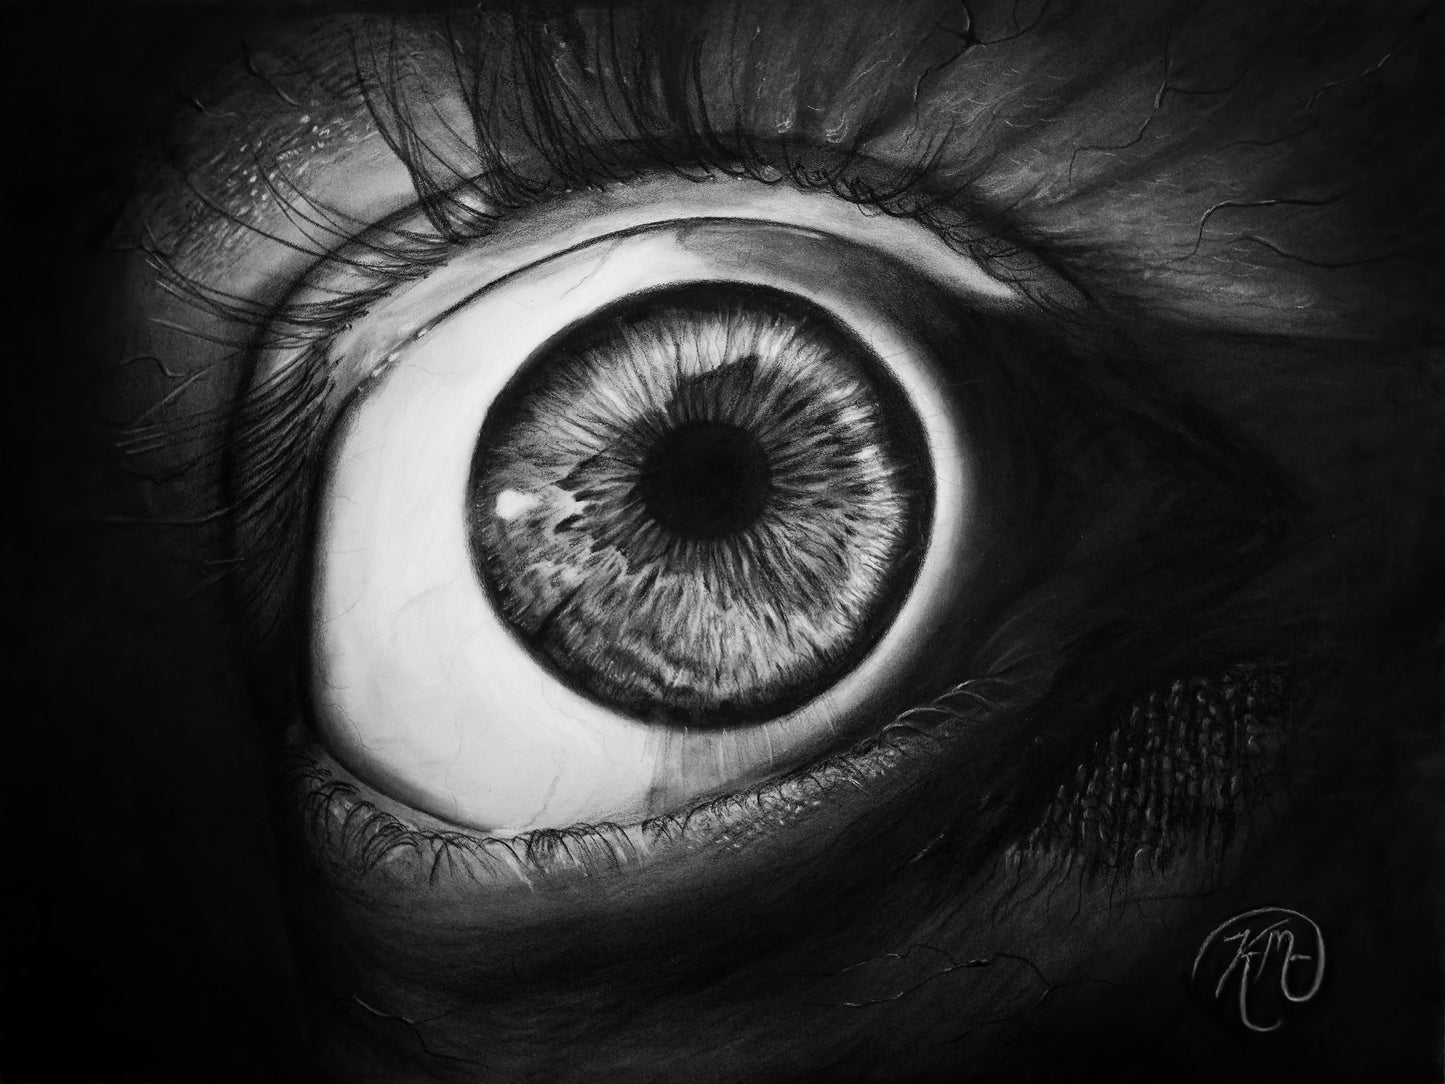 "Eye of the Beholder" Original Charcoal and Pastel Drawing